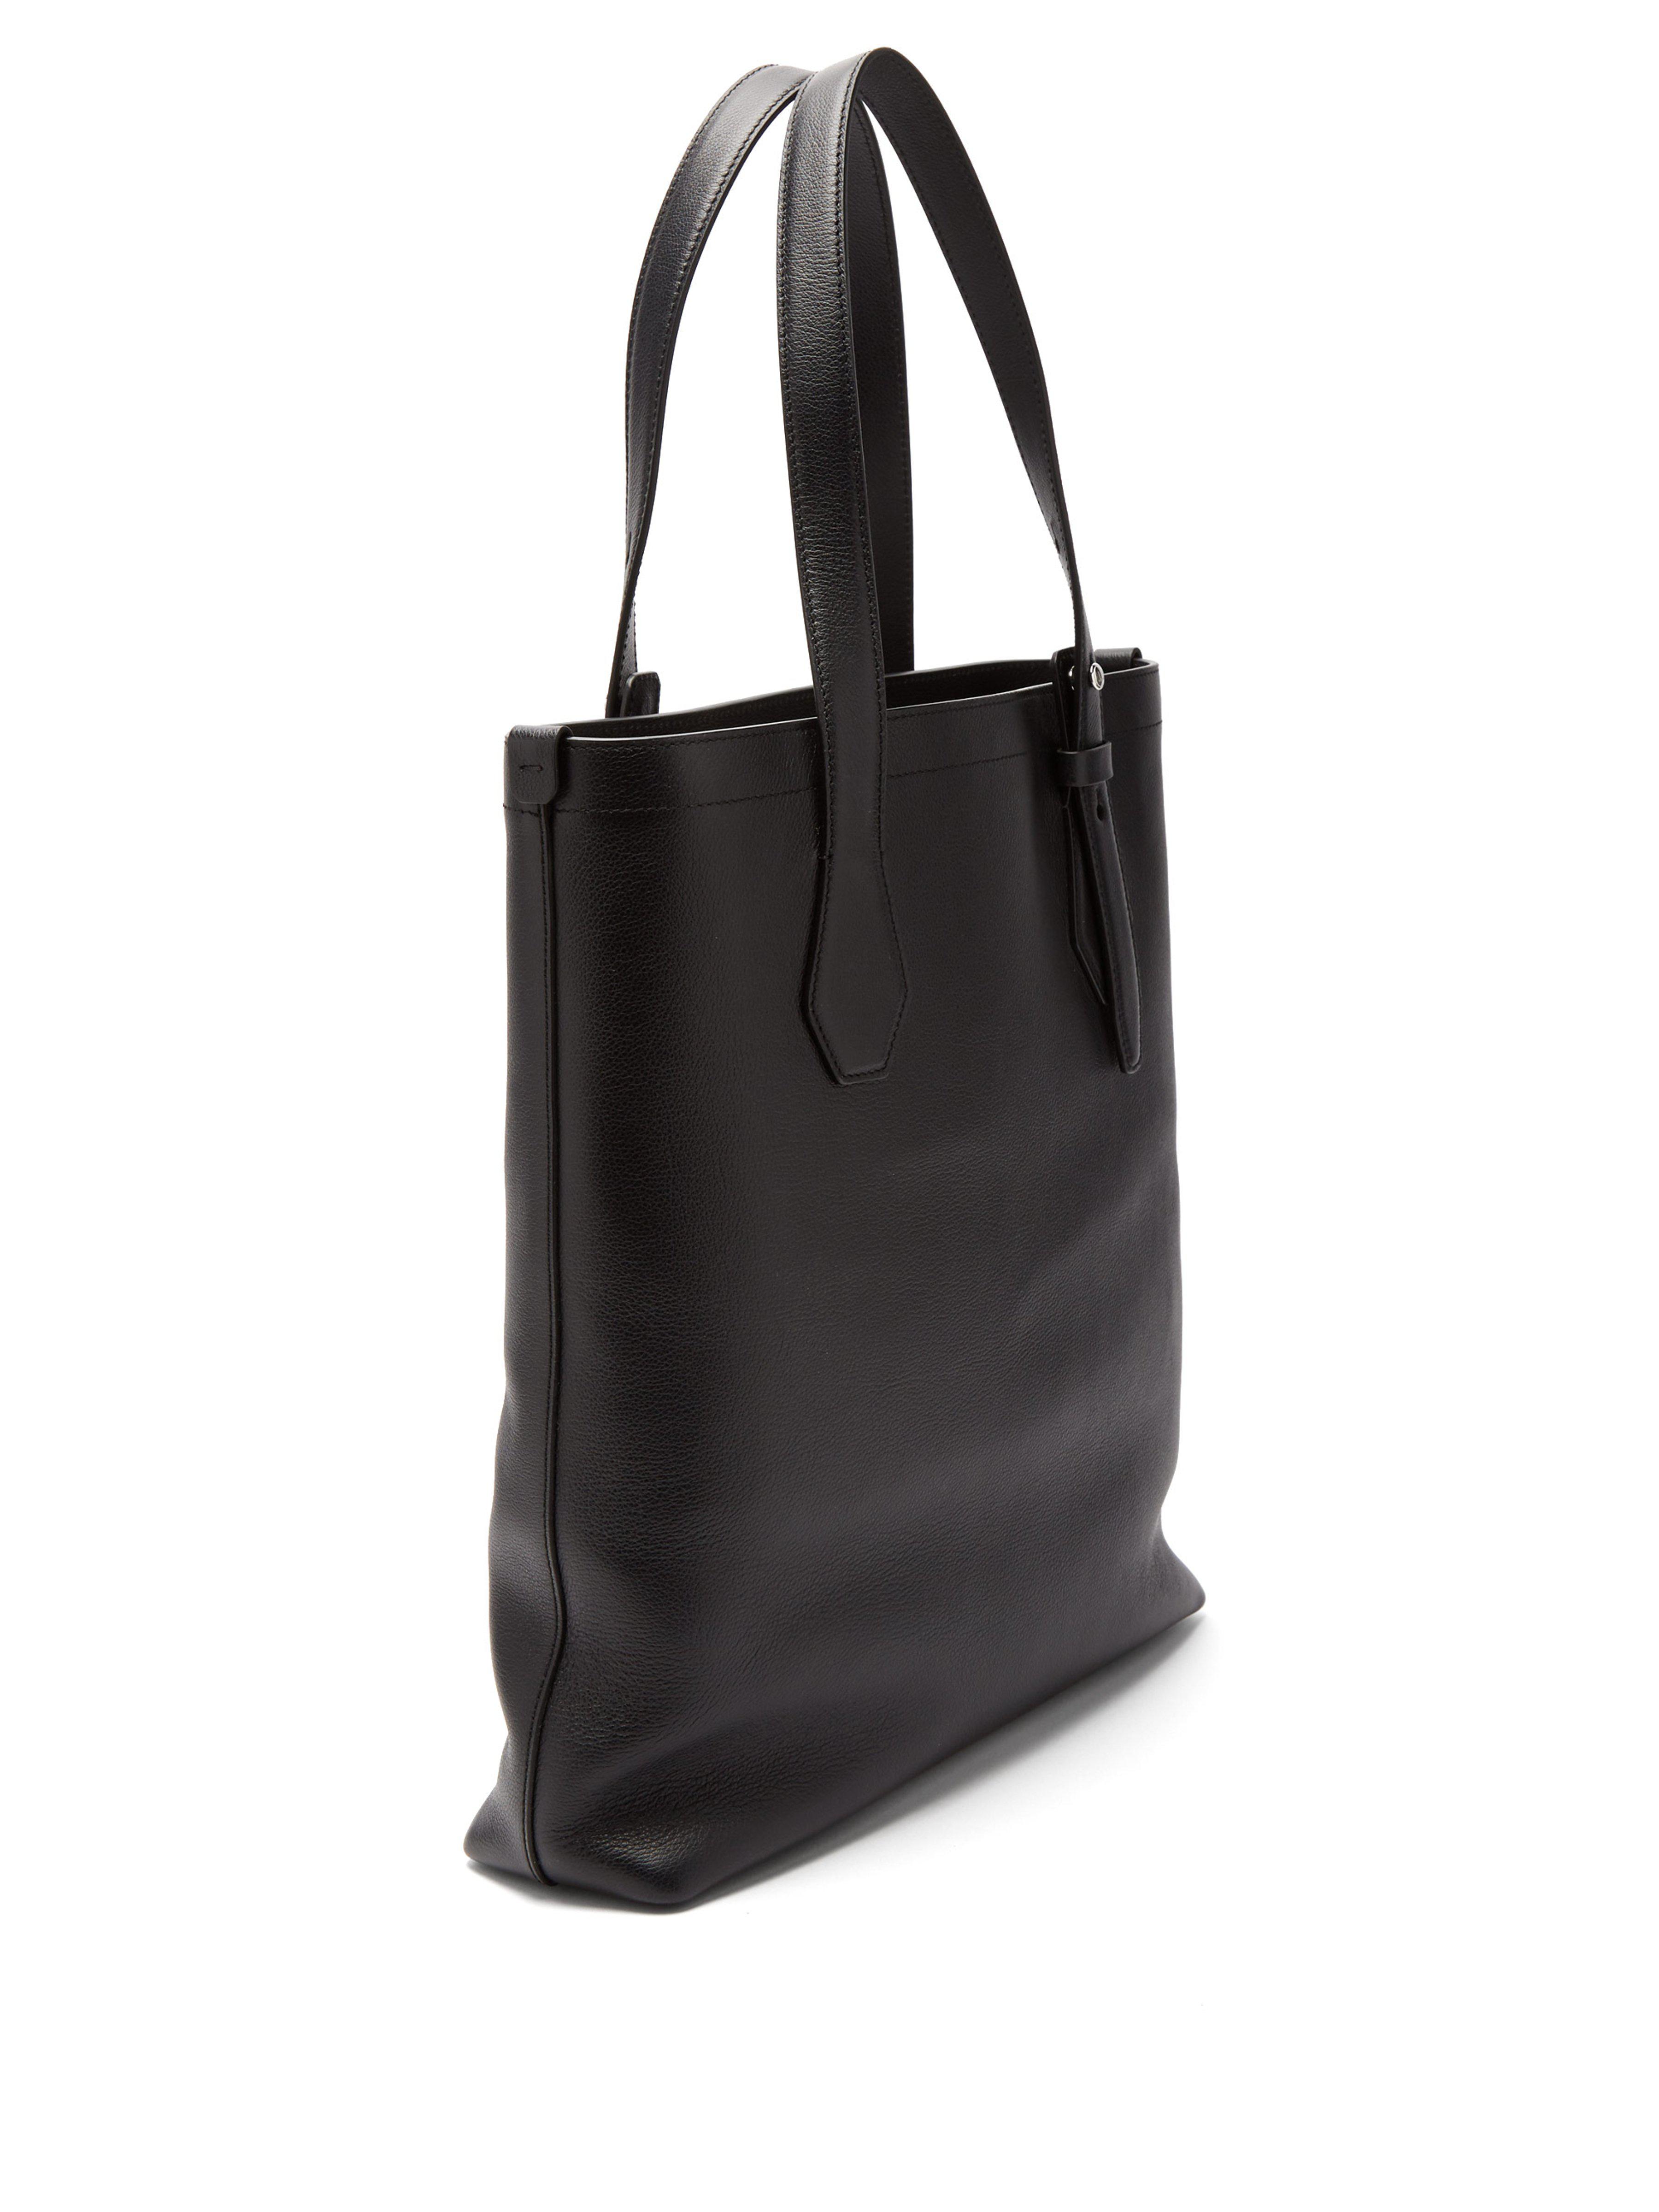 Dunhill Chiltern Logo-debossed Leather Tote in Black for Men - Lyst